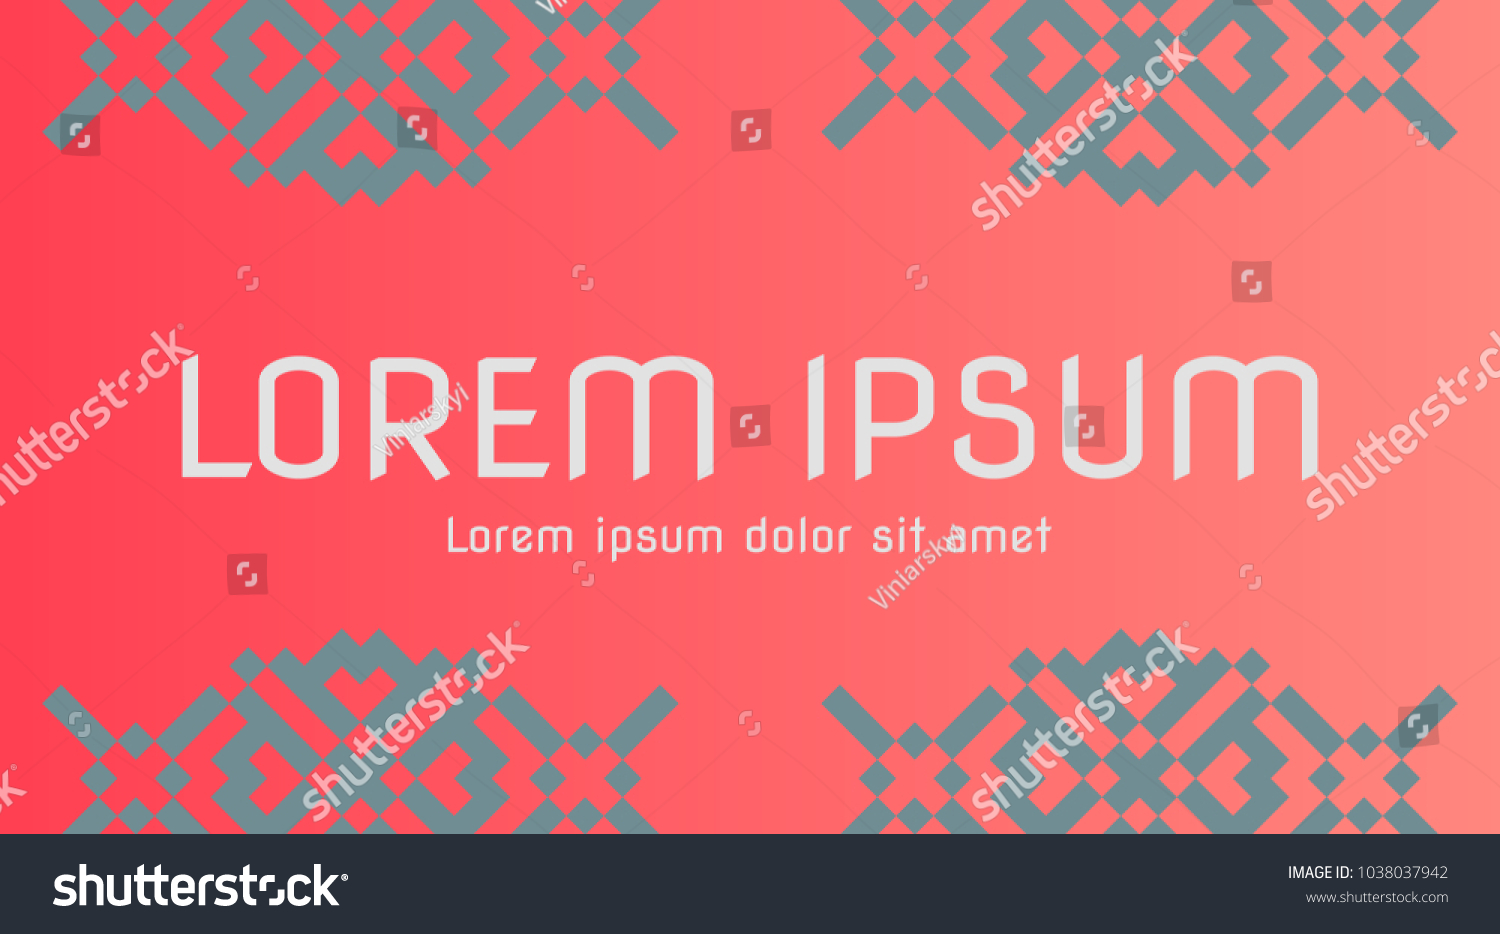 SVG of vector background for business cards, invitations and presentations. diamond-shaped ukrainian ornament on the background svg